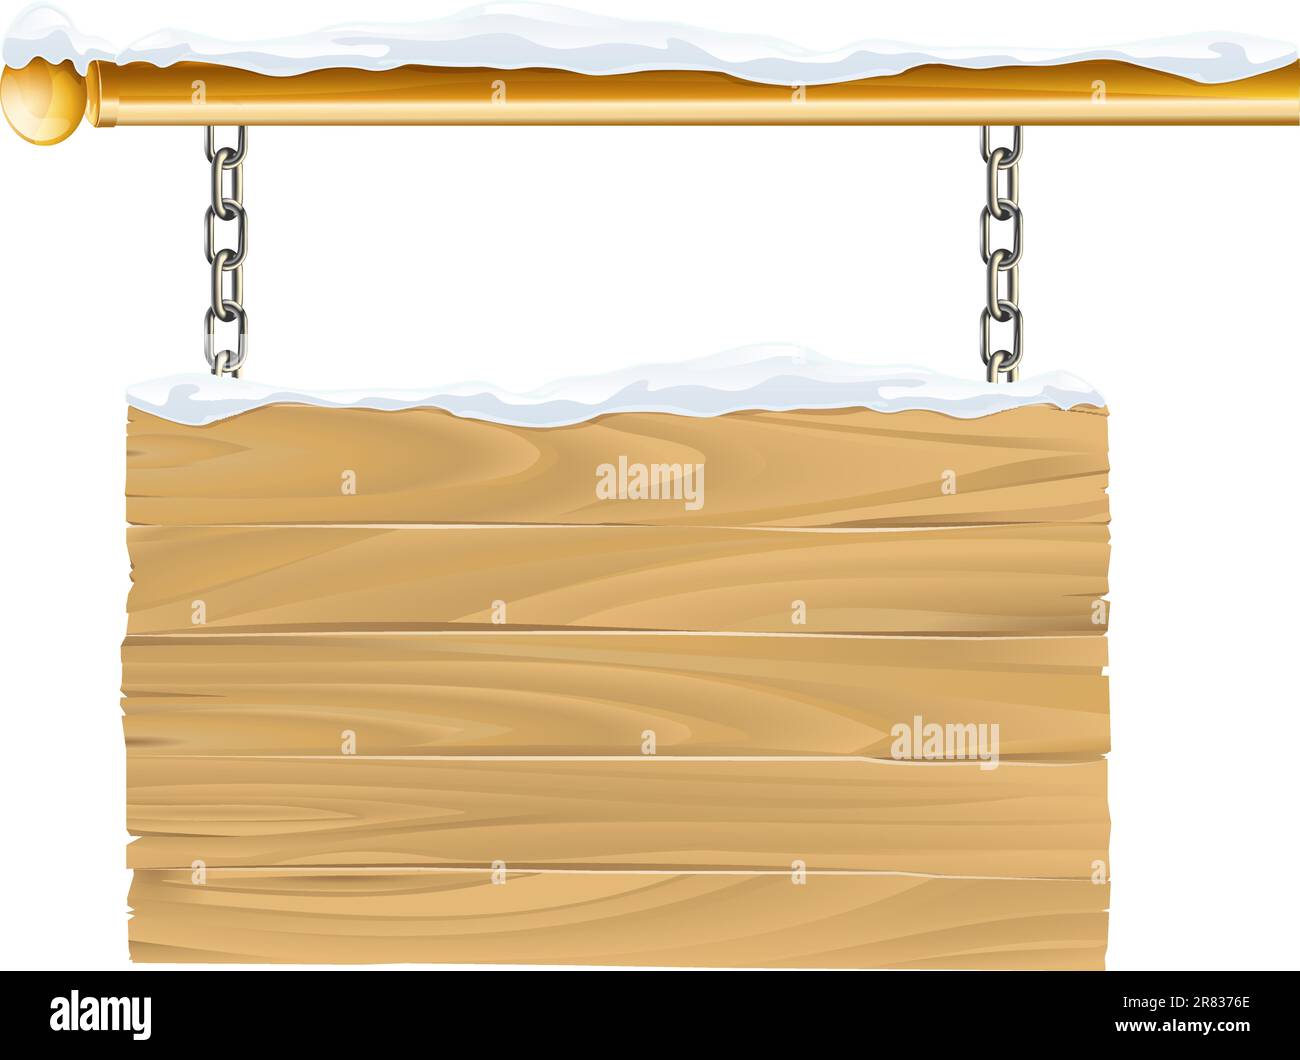 A wooden snowy winter Christmas sign hanging suspended from chains and metal pole Stock Vector